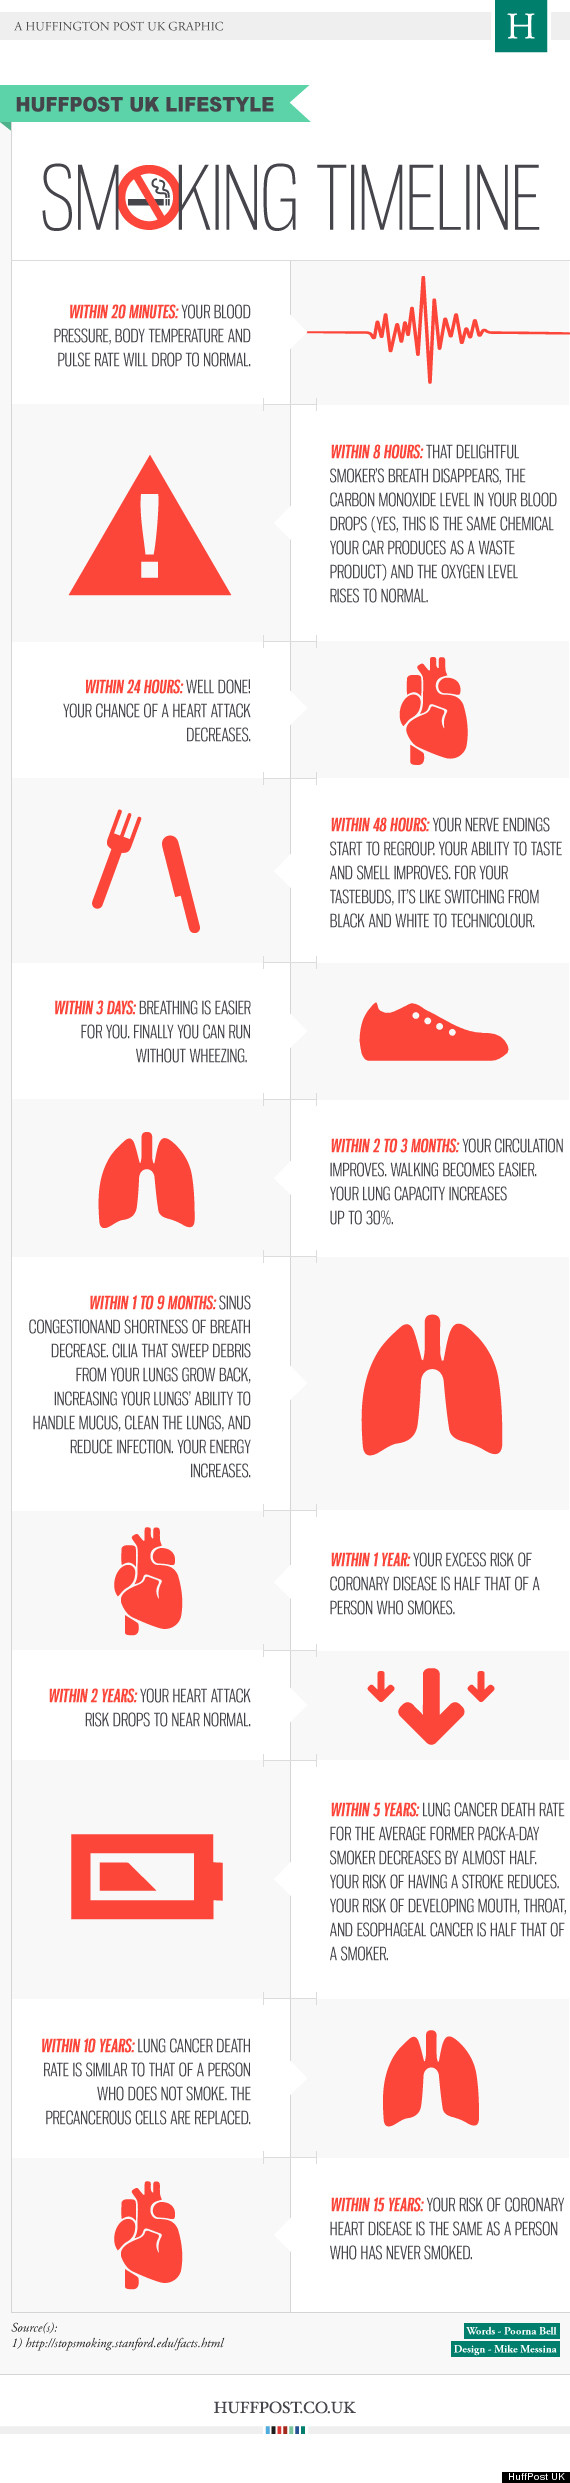 What Happens To Your Body When You Stop Smoking